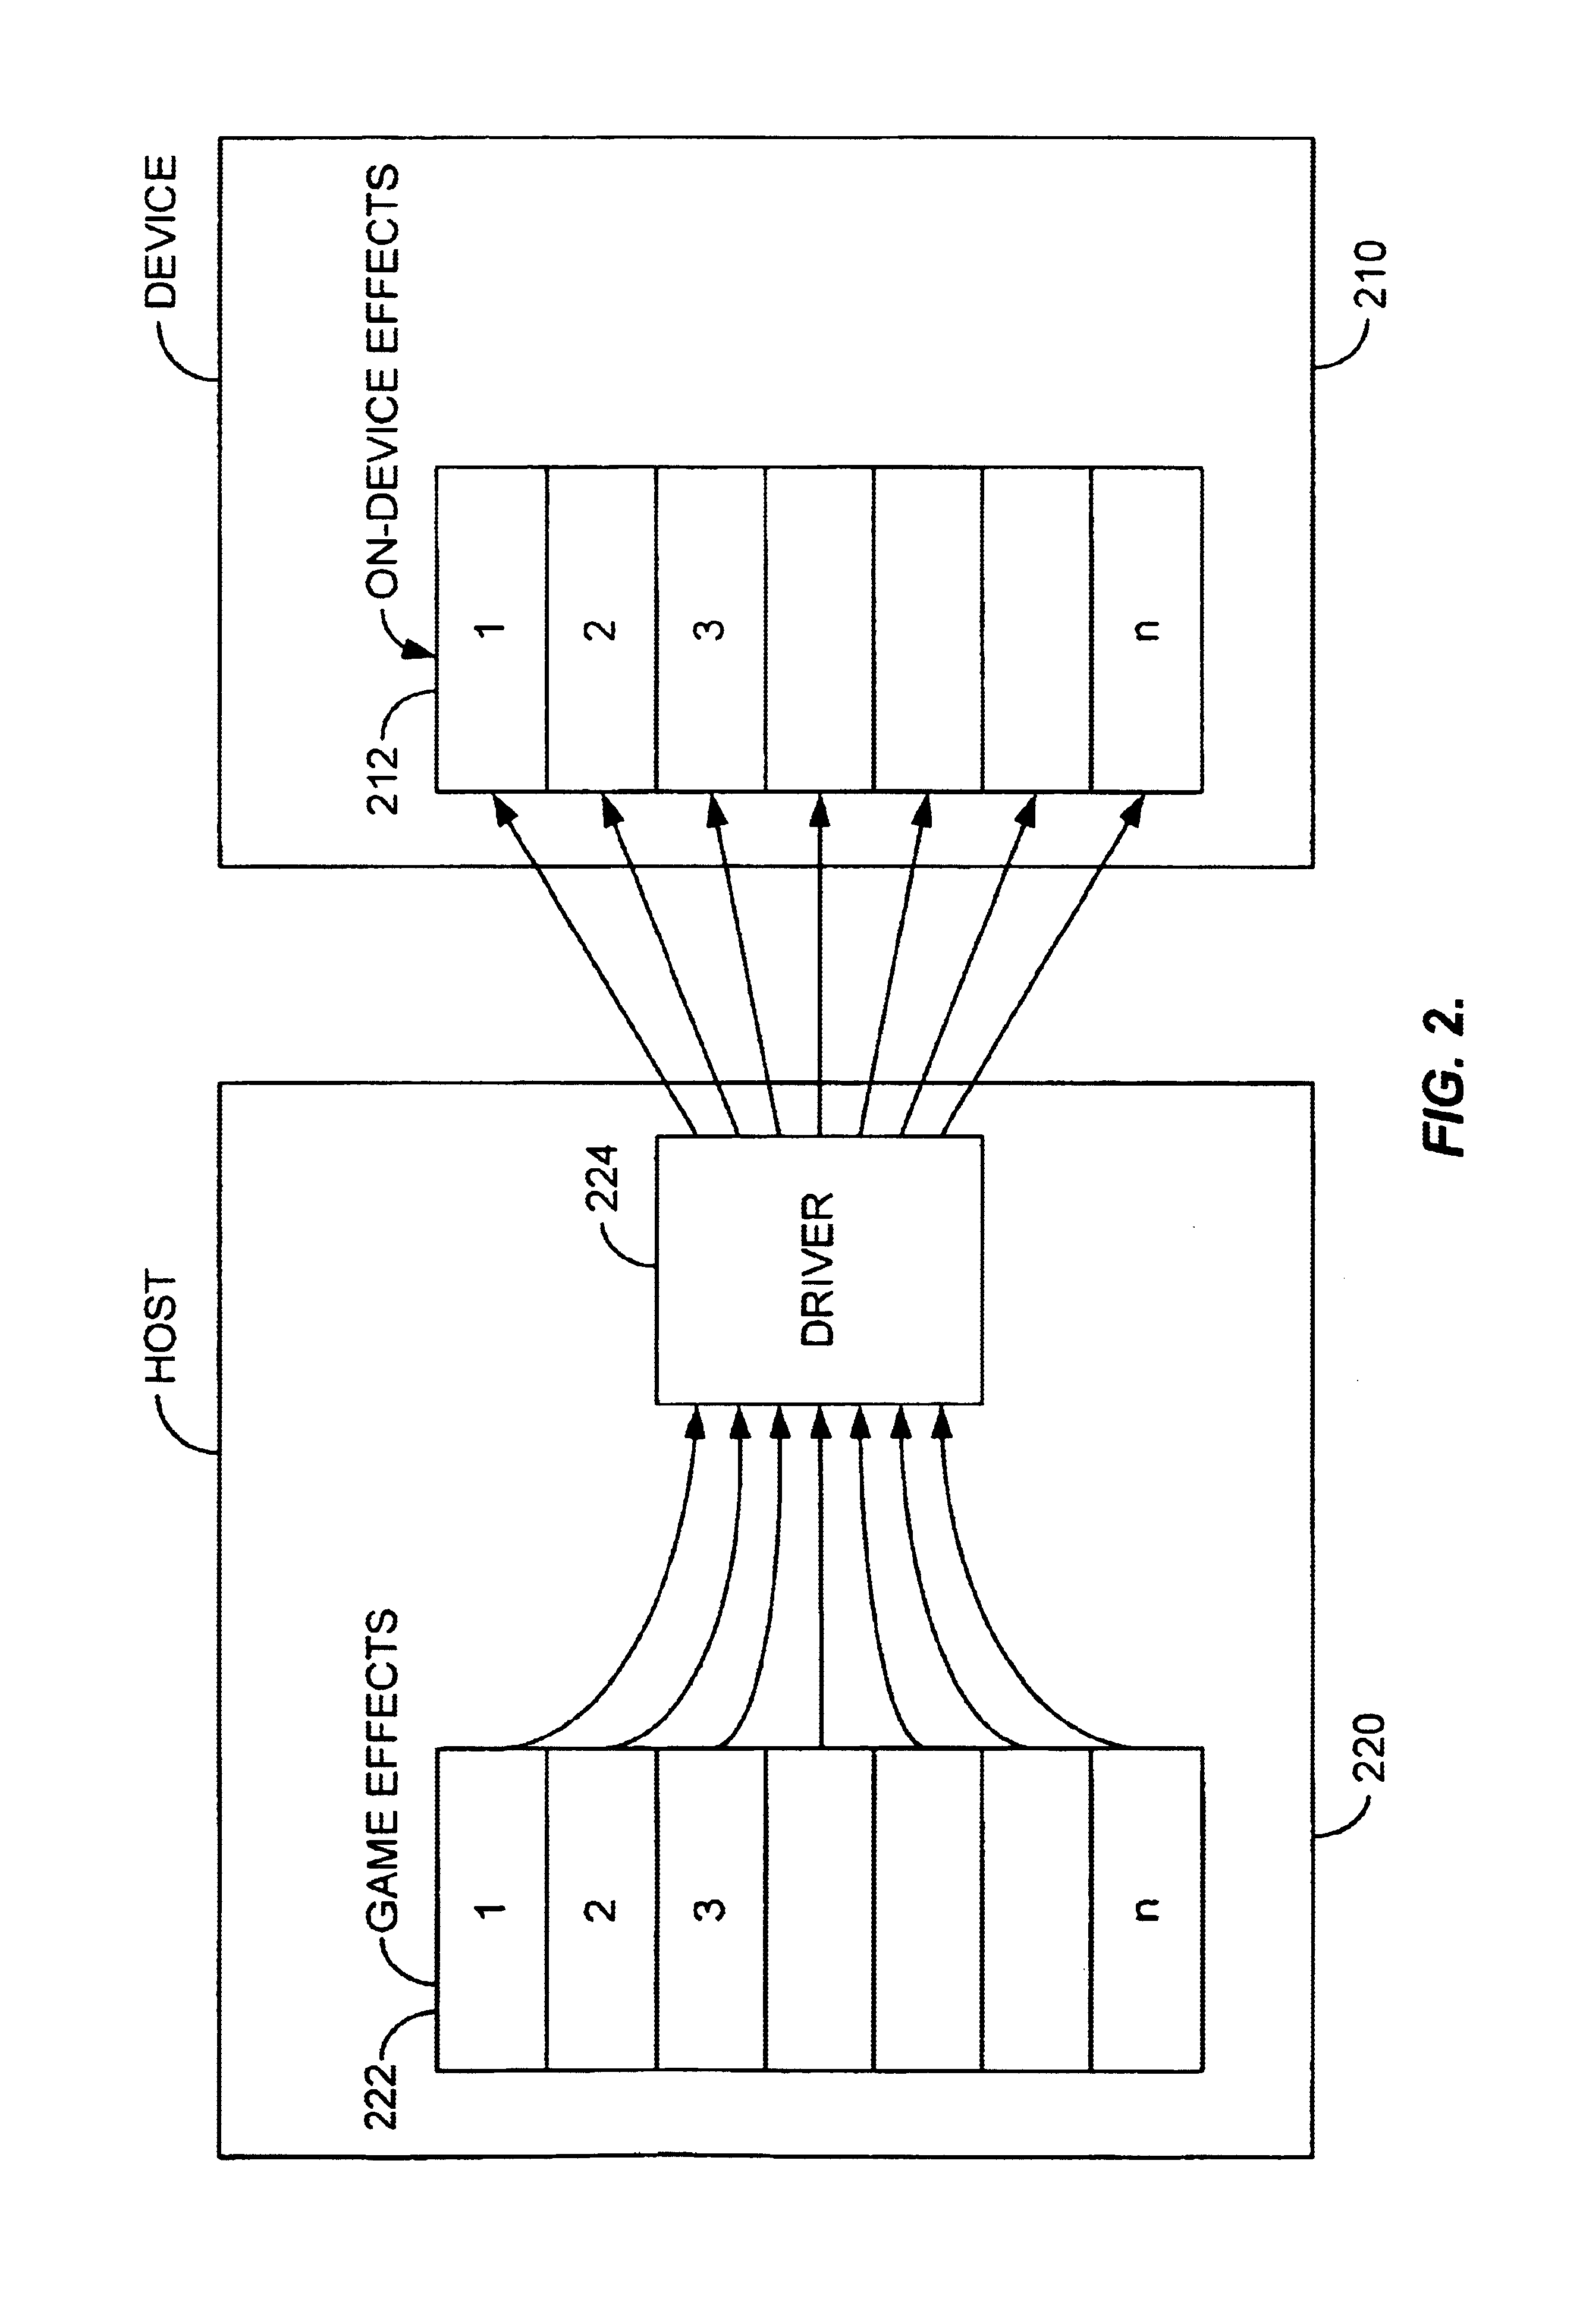 Method and system for processing force feedback effects generated at a host for playback at a physical interaction device